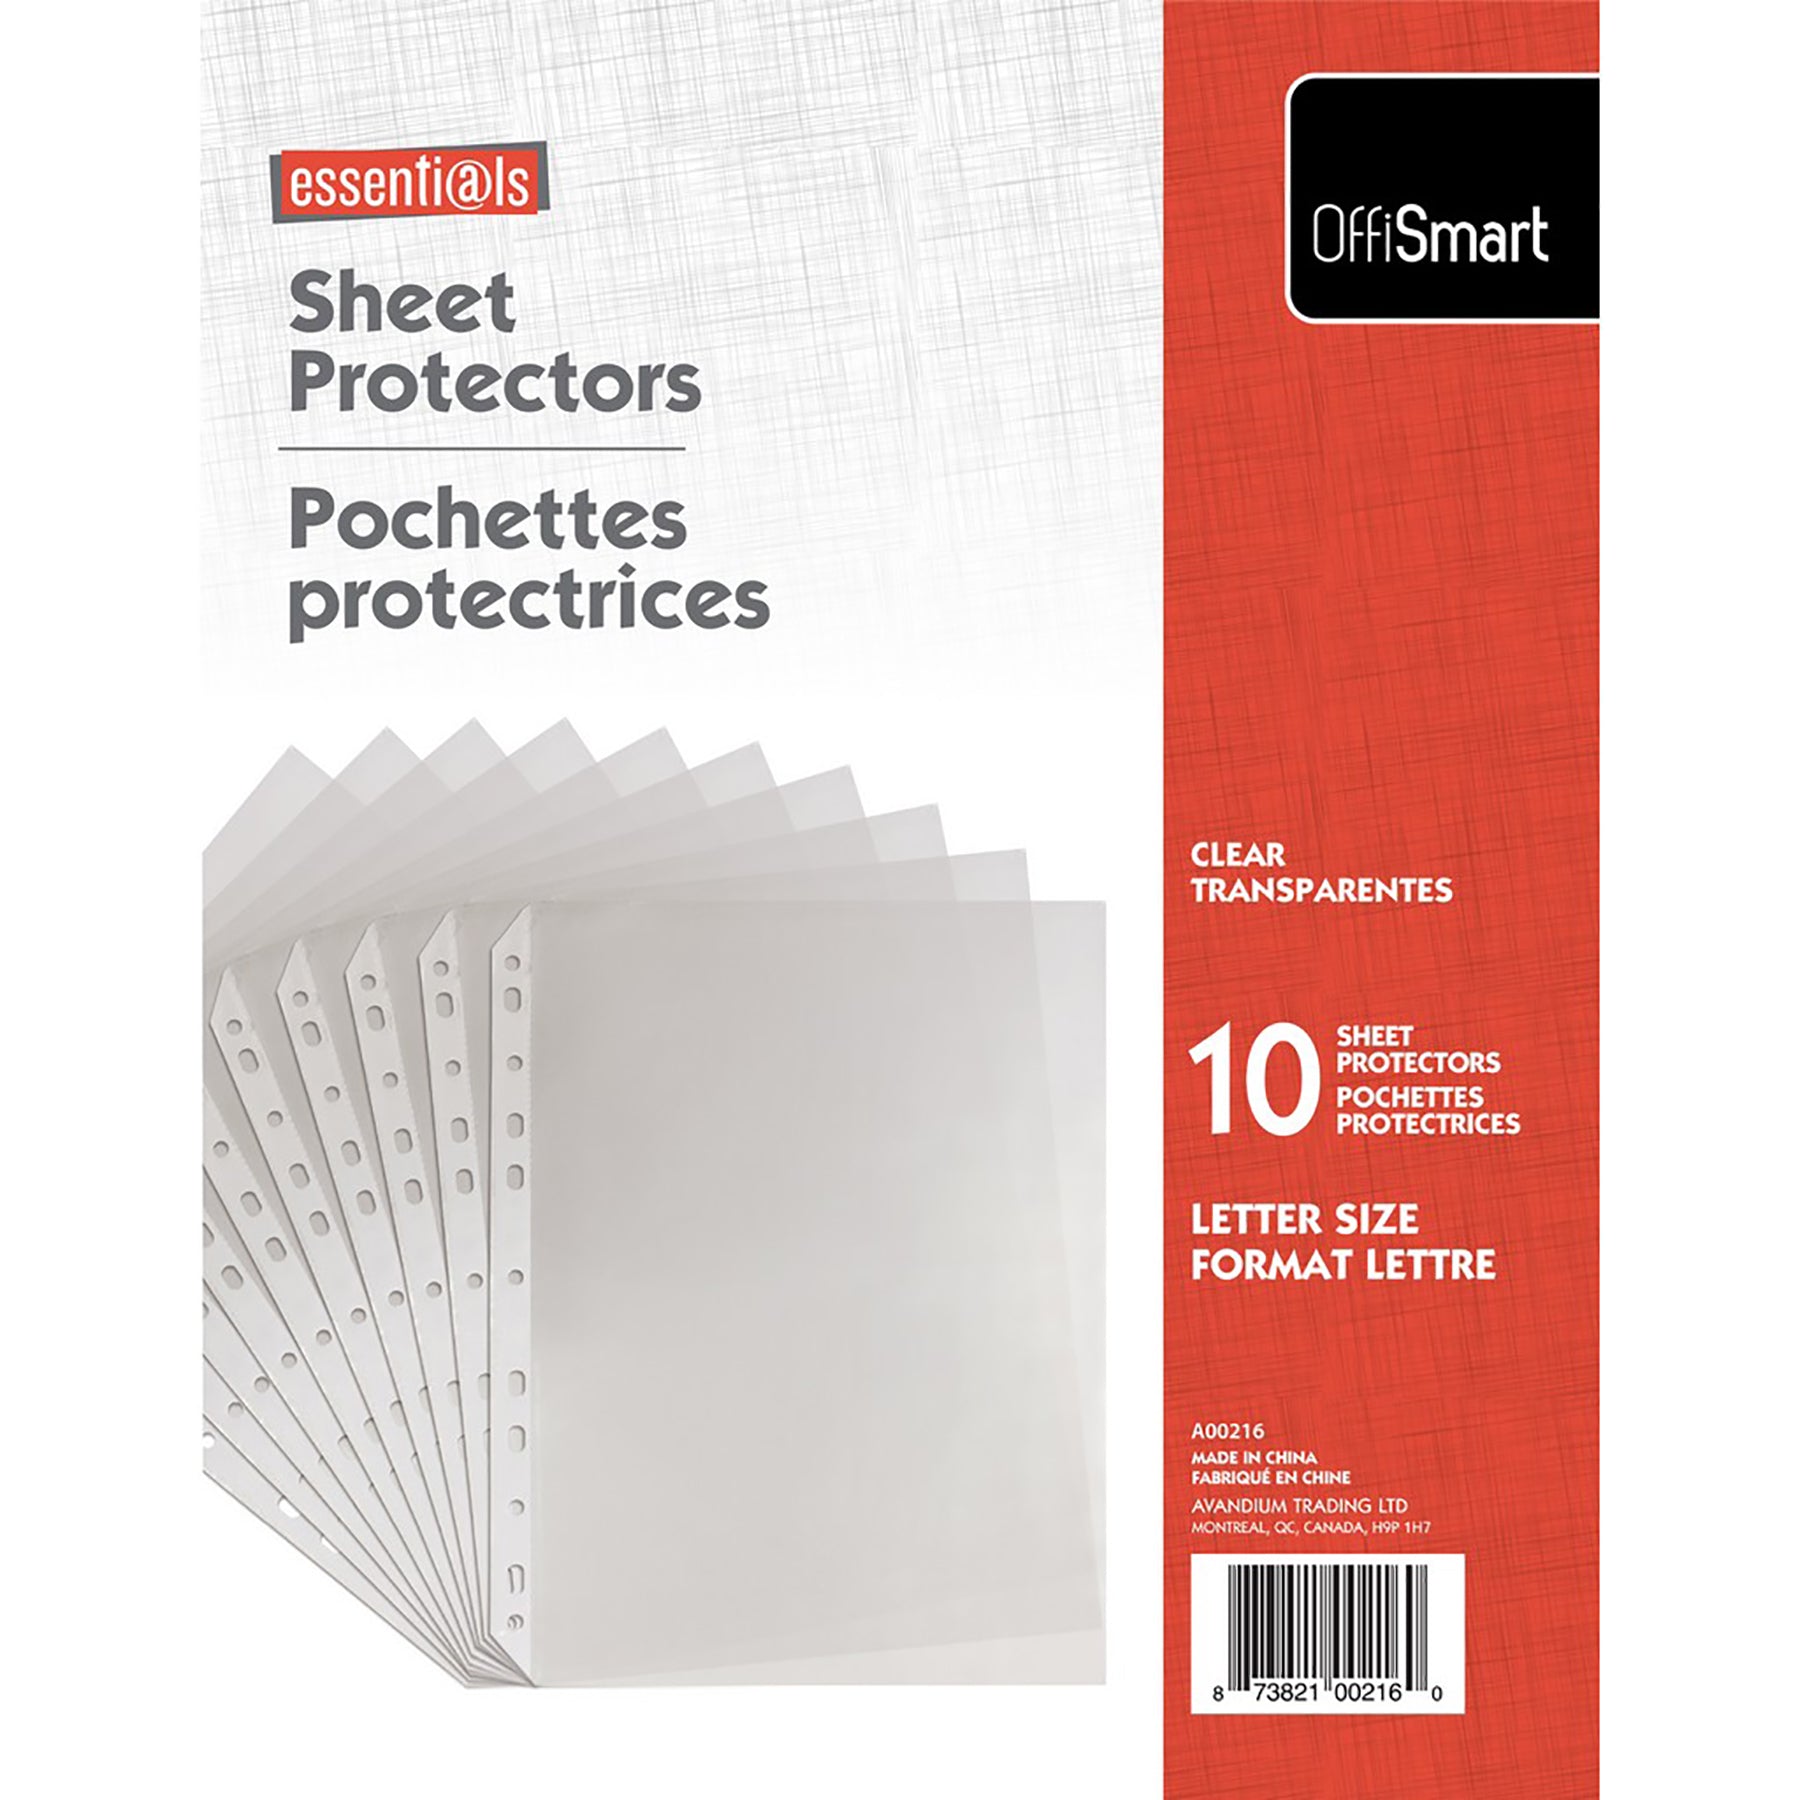 Offismart 10 Sheet Protectors Clear 11.25x8.5in 